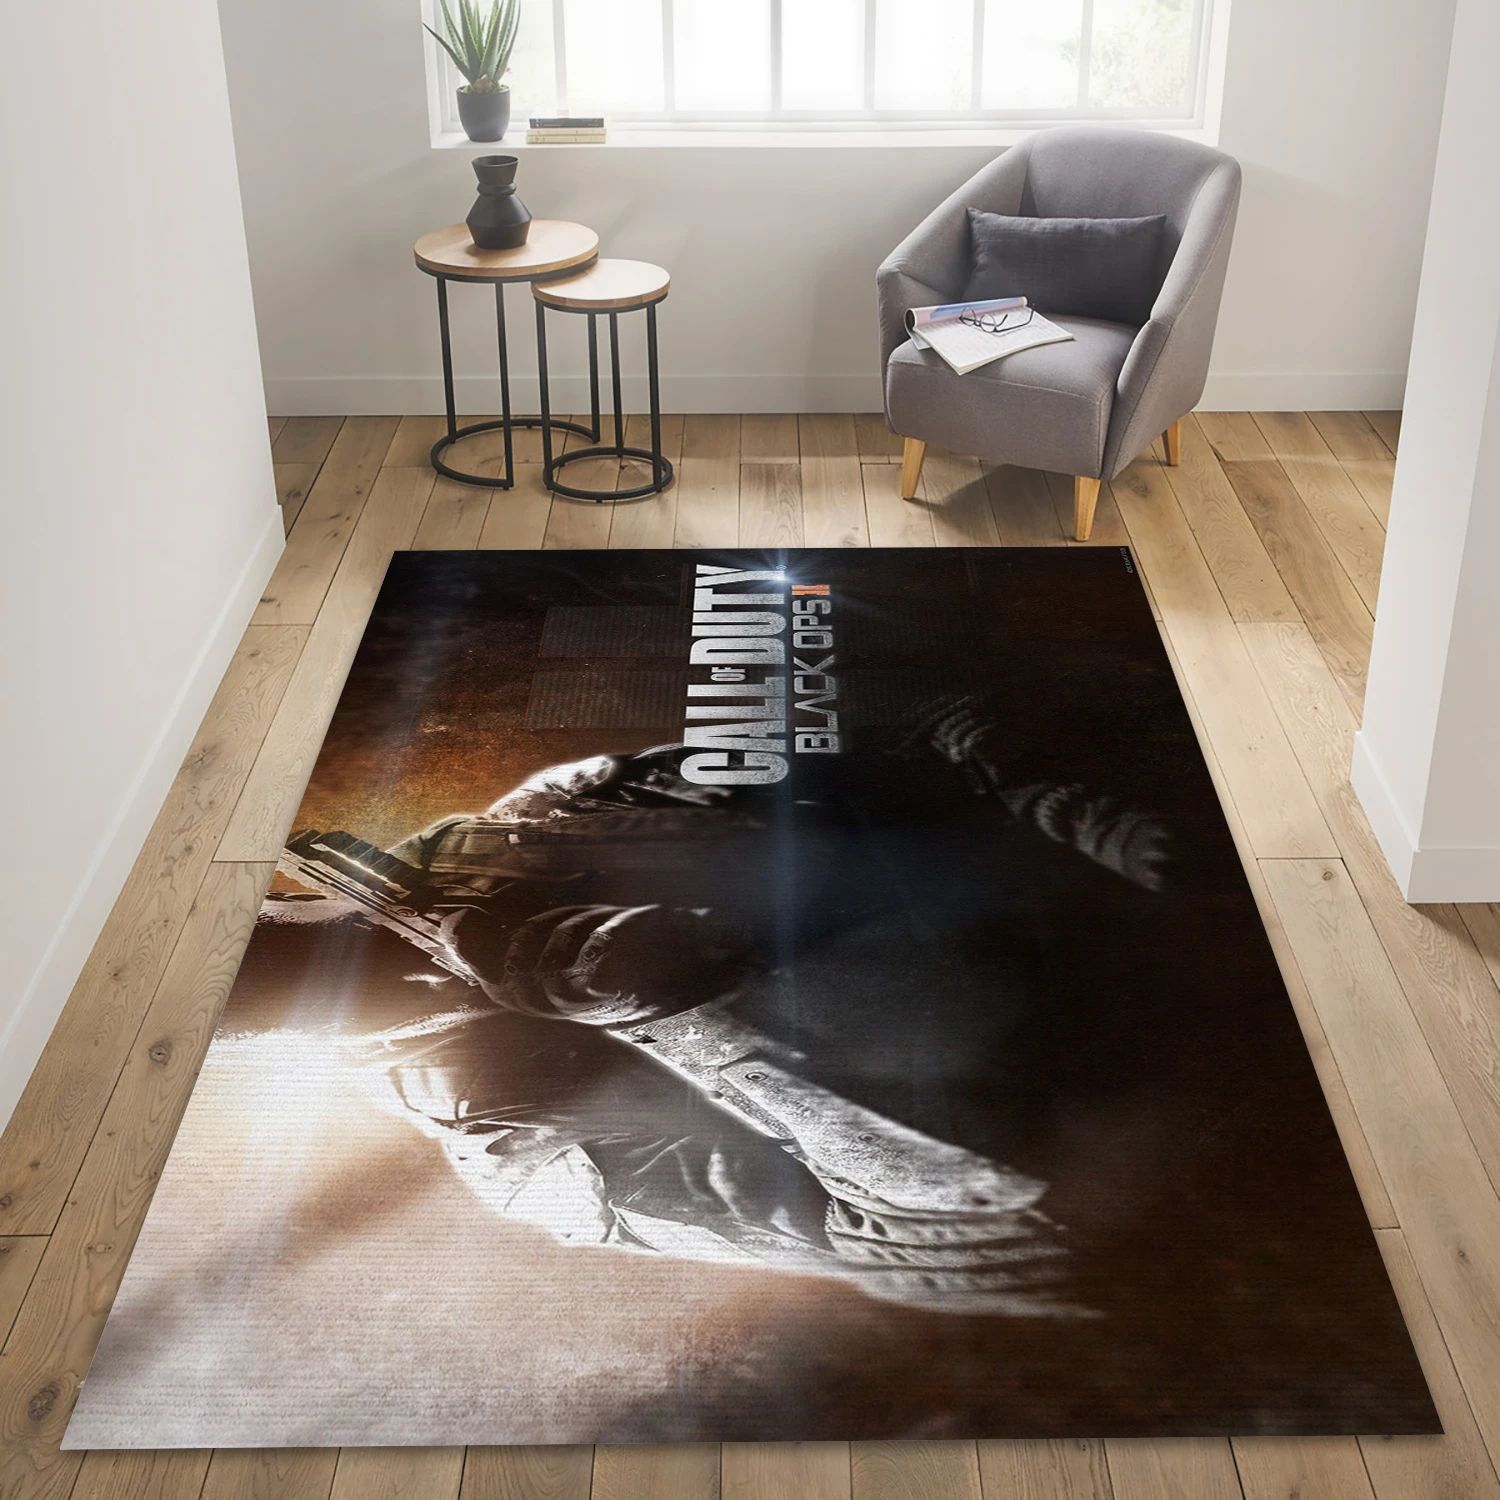 Call Of Duty Black Ops 2 Video Game Area Rug Area, Living Room Rug - Home Decor Floor Decor - Indoor Outdoor Rugs